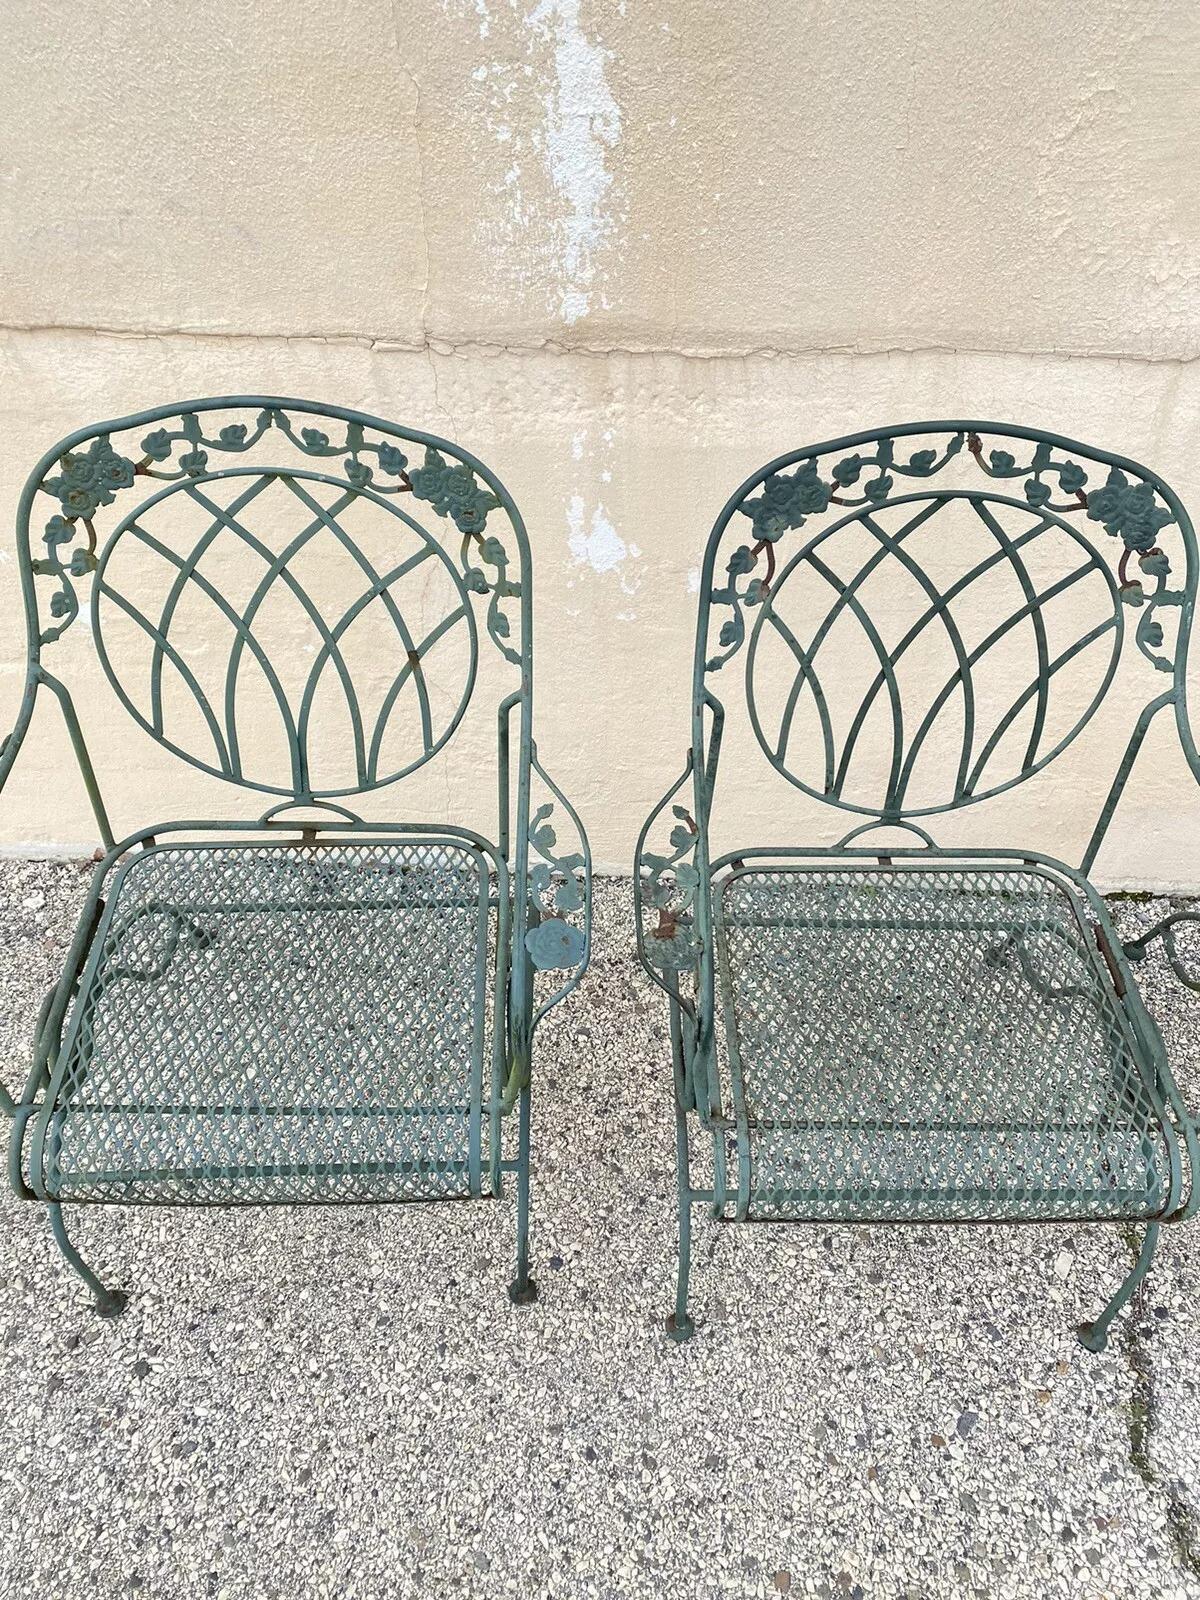 Wrought Iron Green Woodard Rose Style Garden Patio Springer Chairs - Set of 4 In Good Condition For Sale In Philadelphia, PA